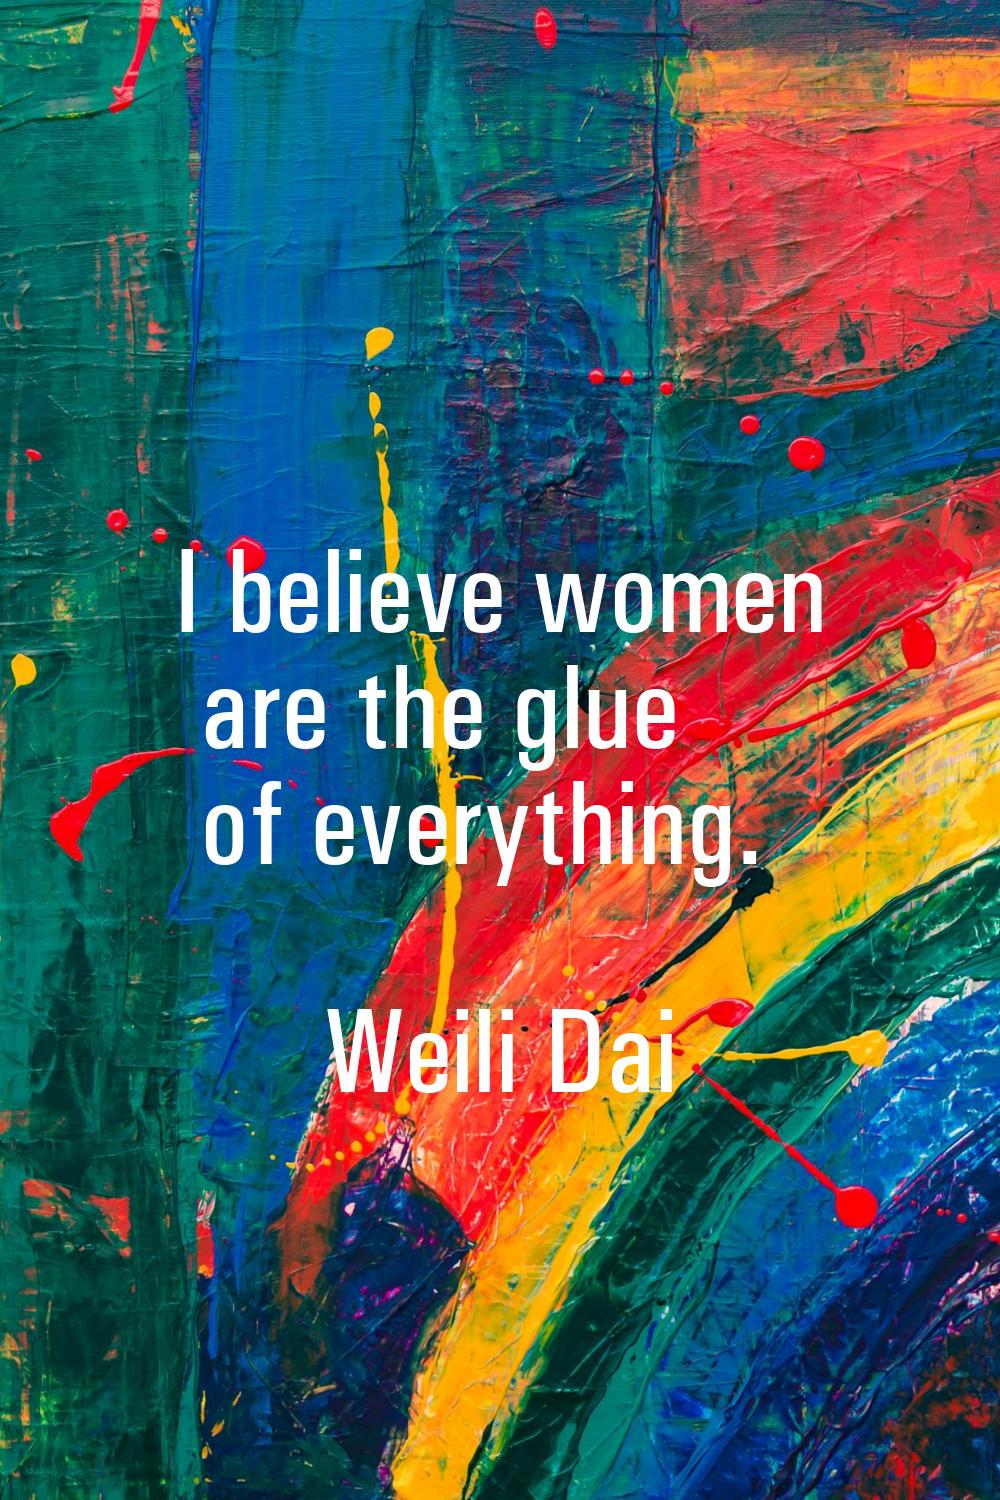 I believe women are the glue of everything.